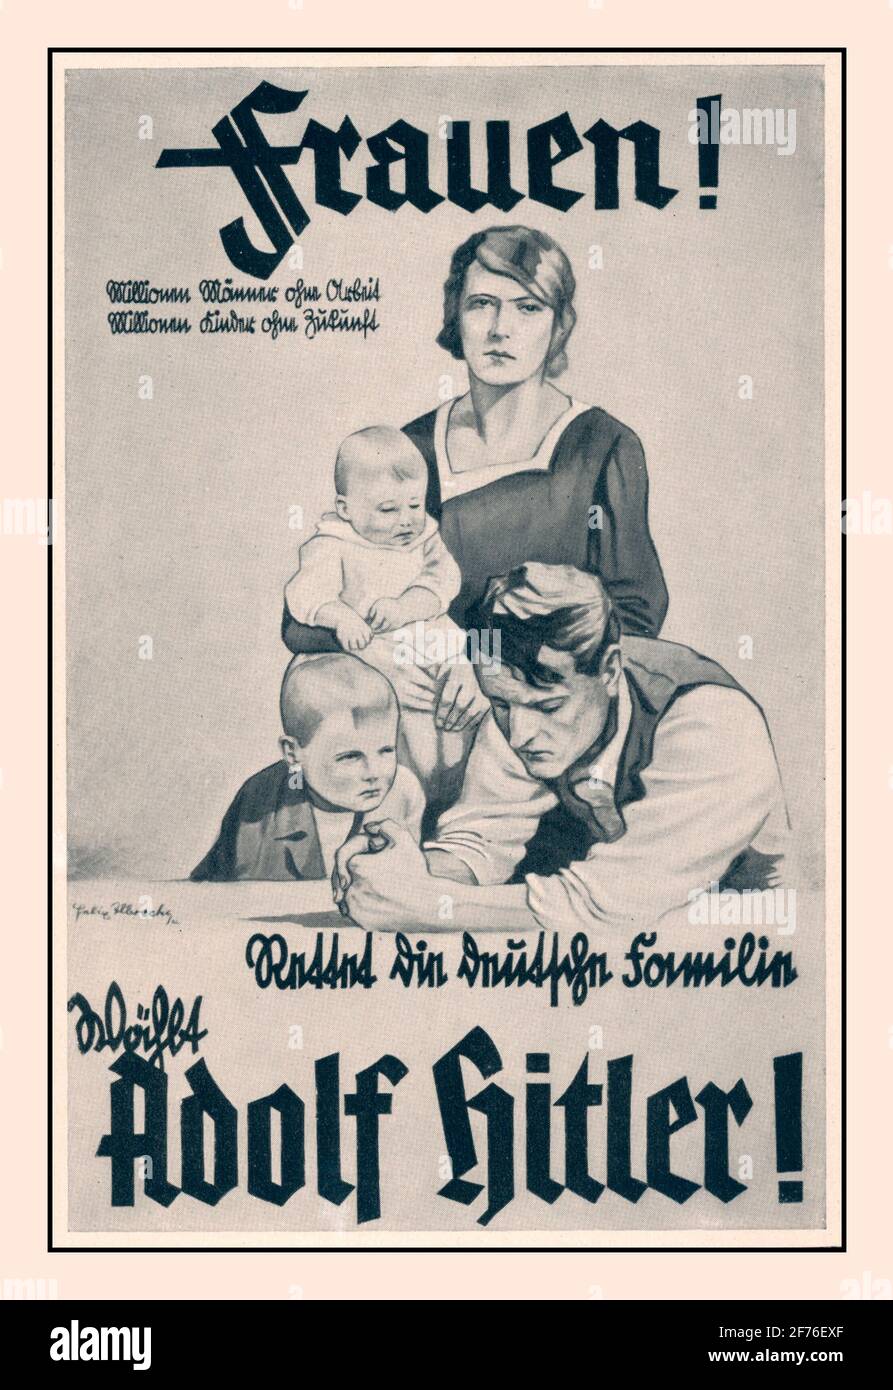 1930's Nazi election poster 'Women! Save the German families - vote for Adolf Hitler' (orig. German:  'Frauen! Rettet die deutschen Familien - wählt Adolf Hitler'), beginning of the 1930s Nazi Propaganda Posters appealing to women of Germany to elect and support Adolf Hitler and thereby help their husbands Stock Photo